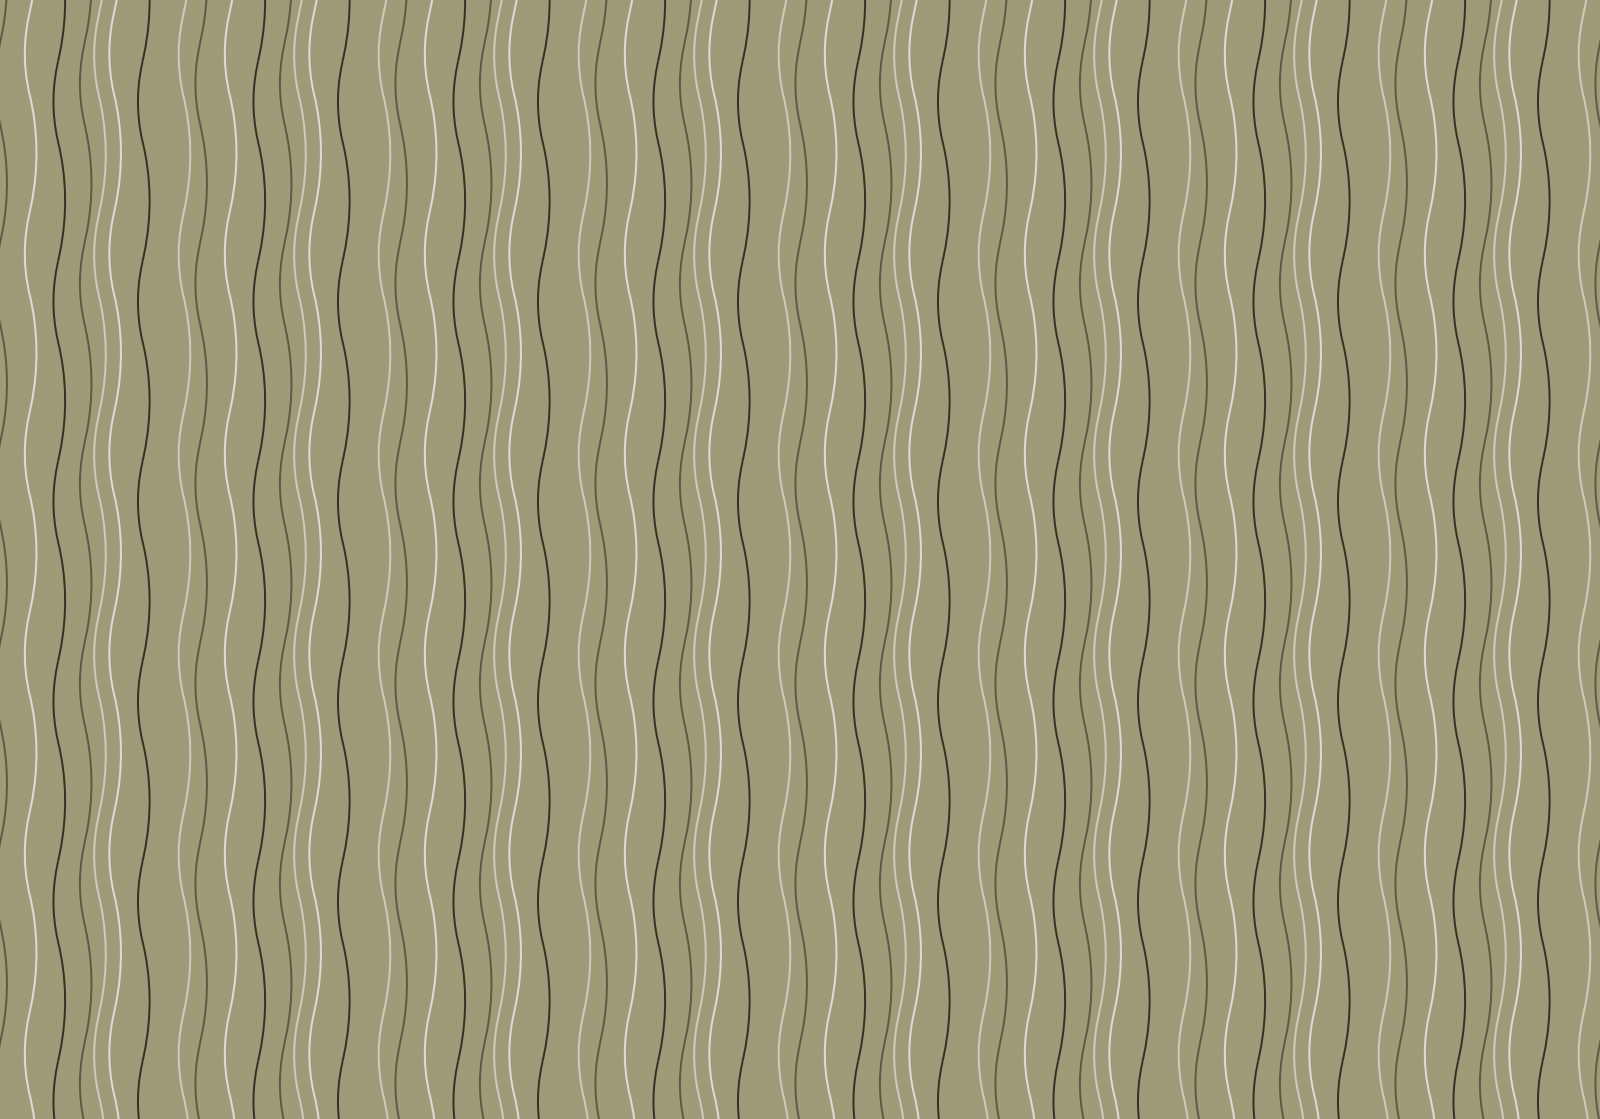 121048 download wallpaper light coloured, light, texture, textures, surface, irregularities screensavers and pictures for free